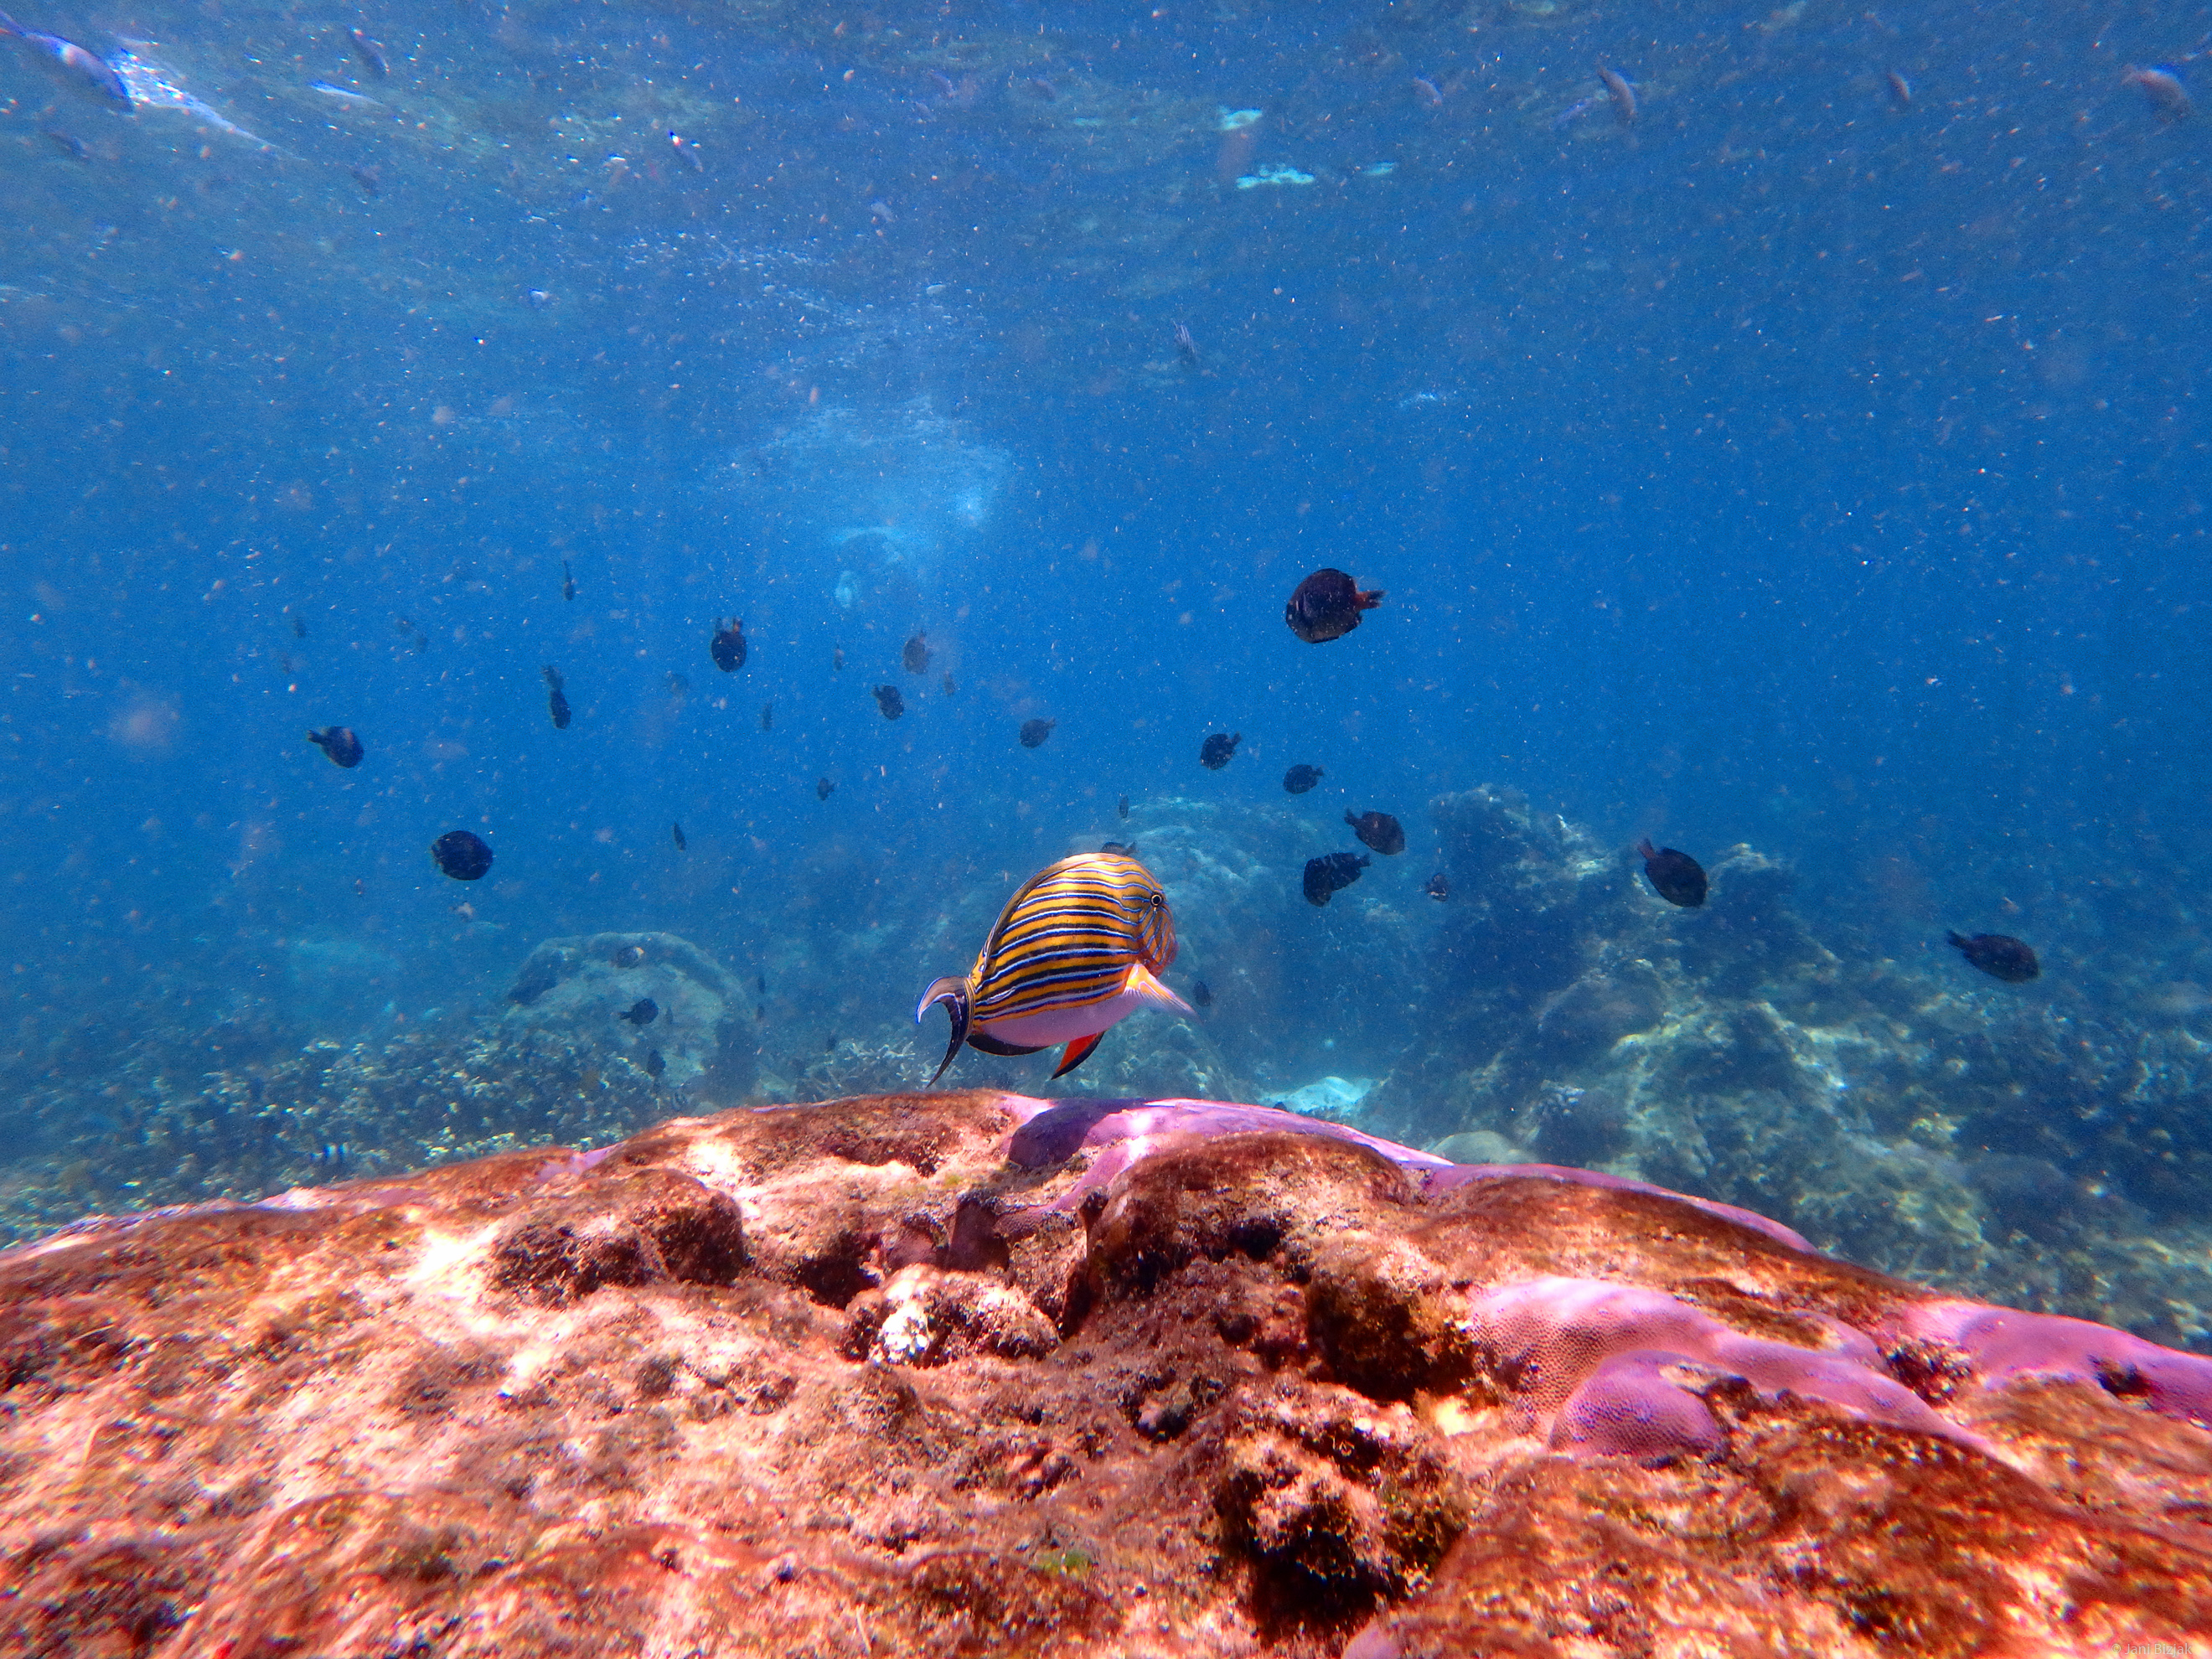 The reefs were full of fishes and corals.